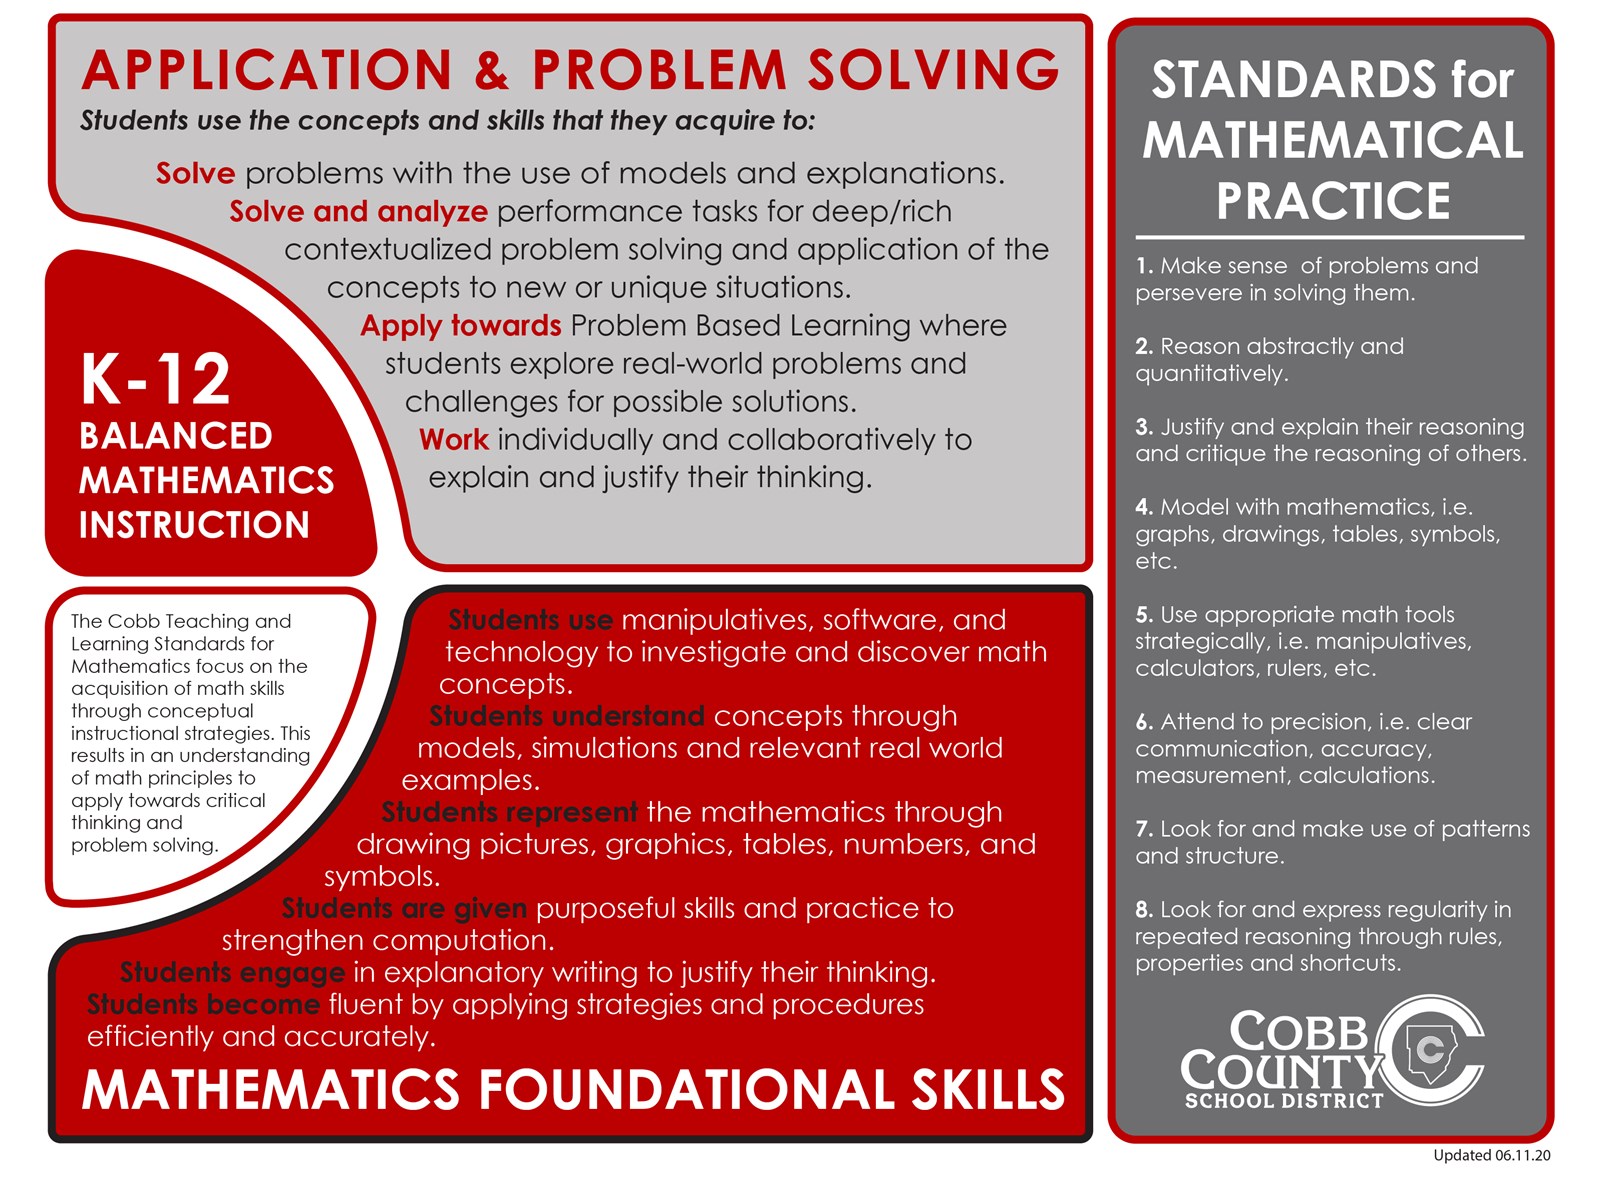 Click Here to access a video pertaining to Balanced Instruction for the CCSD Mathematics Department